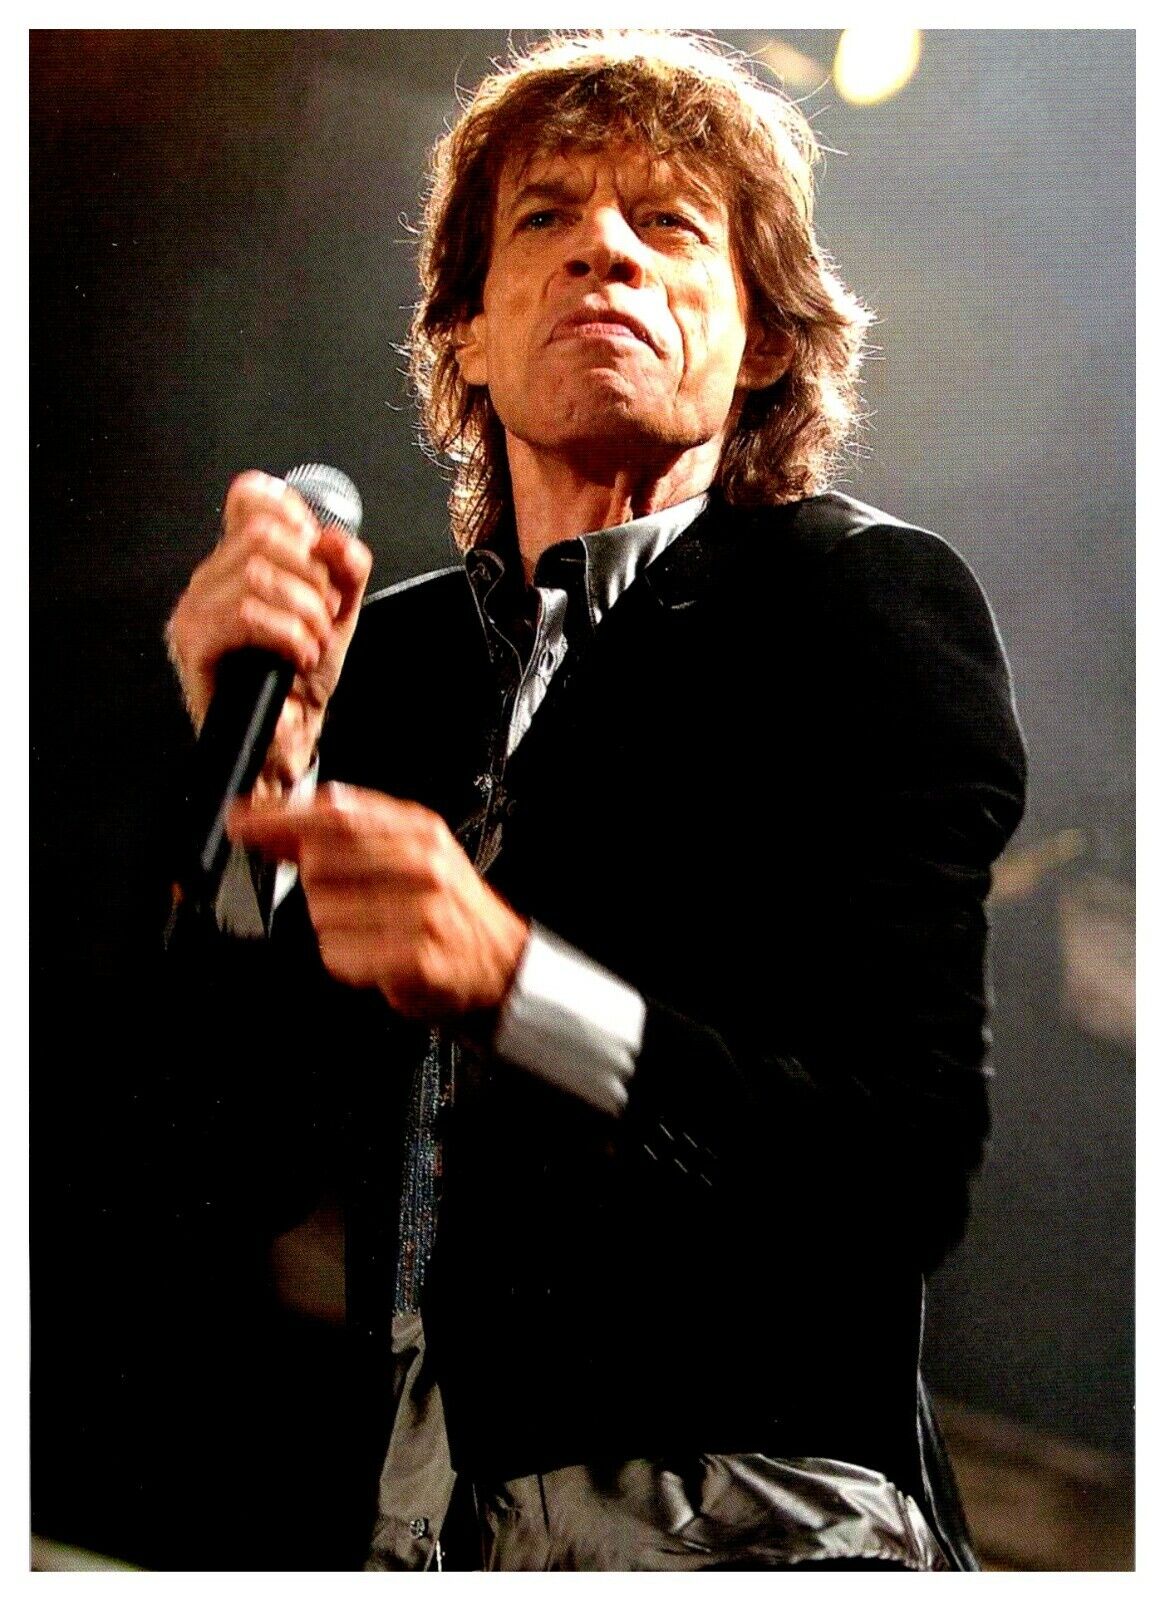 Mick Jagger The Rolling Stones 4.5" X 6" Photo Book Magazine Clipping Gh9